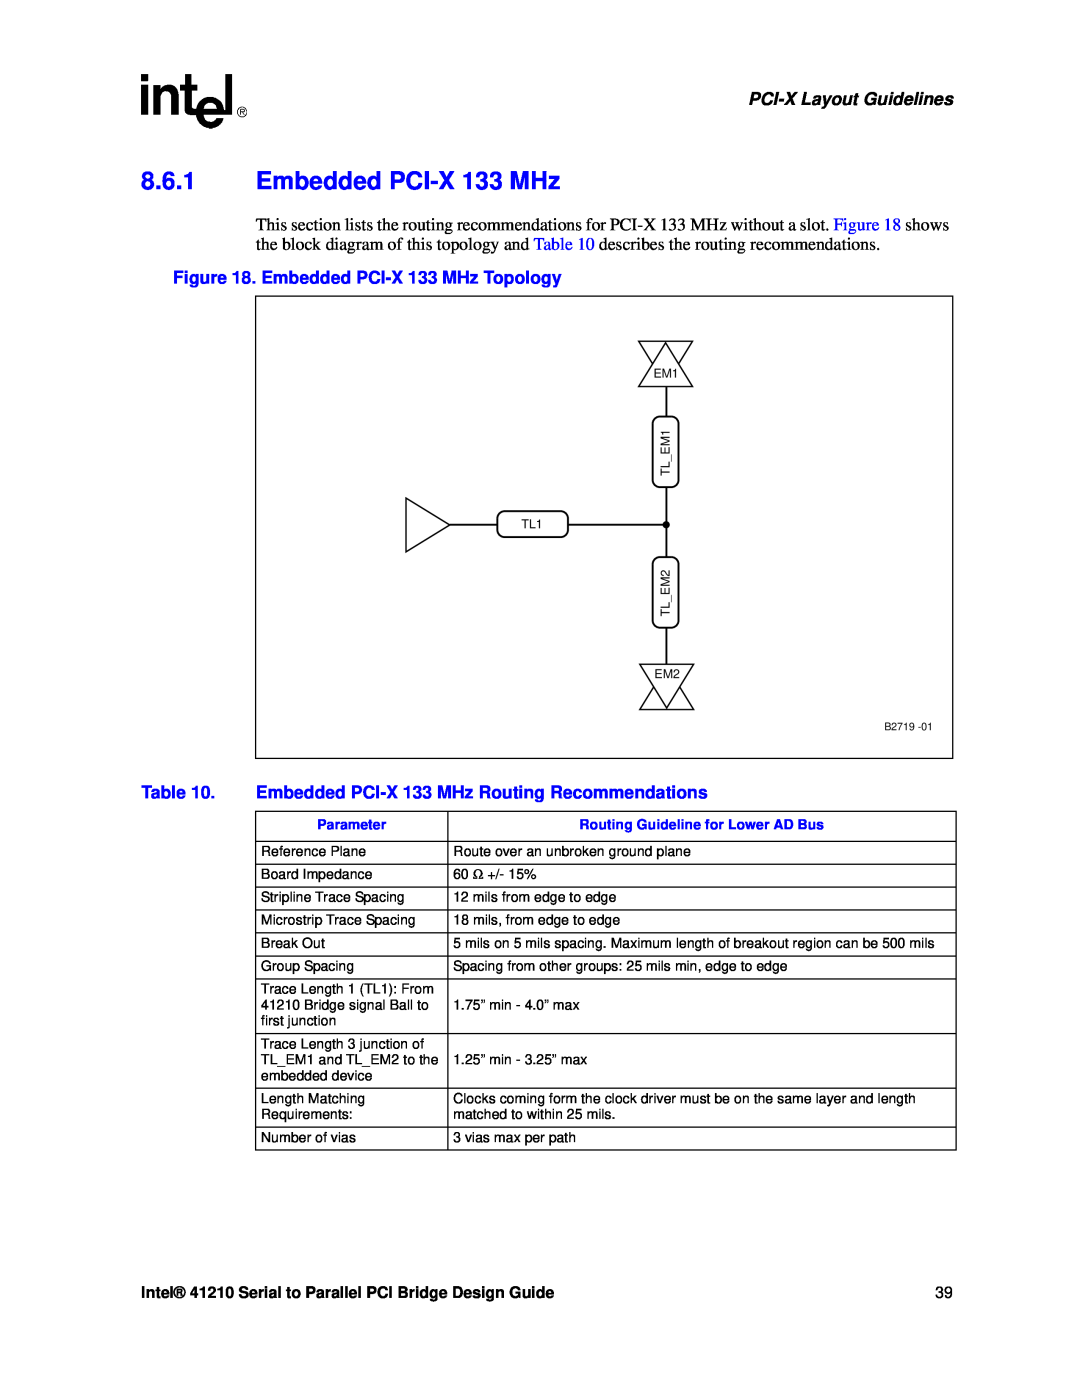 Intel 41210 Embedded PCI-X 133 MHz Topology, Embedded PCI-X 133 MHz Routing Recommendations, PCI-X Layout Guidelines 